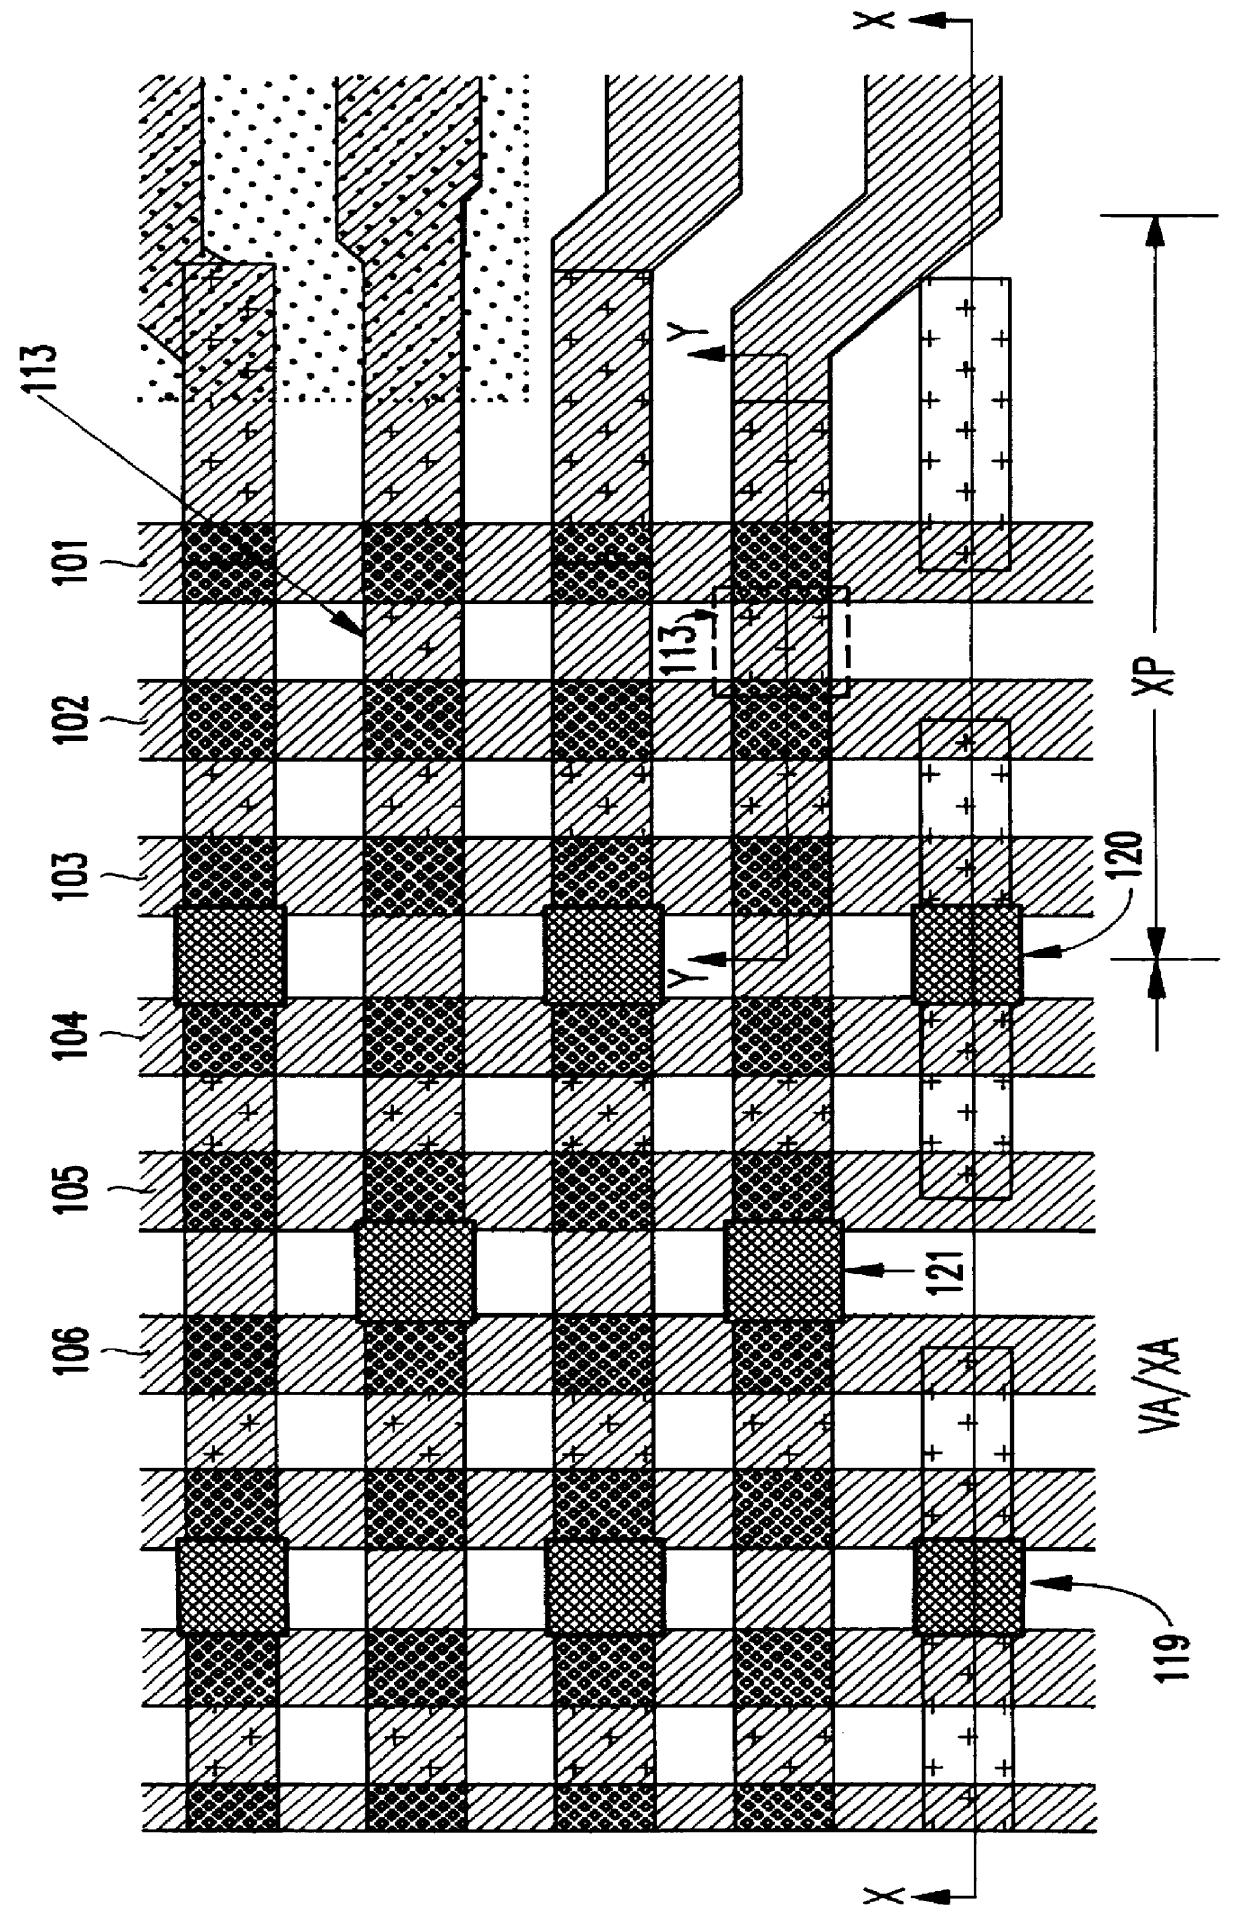 Metal oxide semiconductor capacitor utilizing dummy lithographic patterns